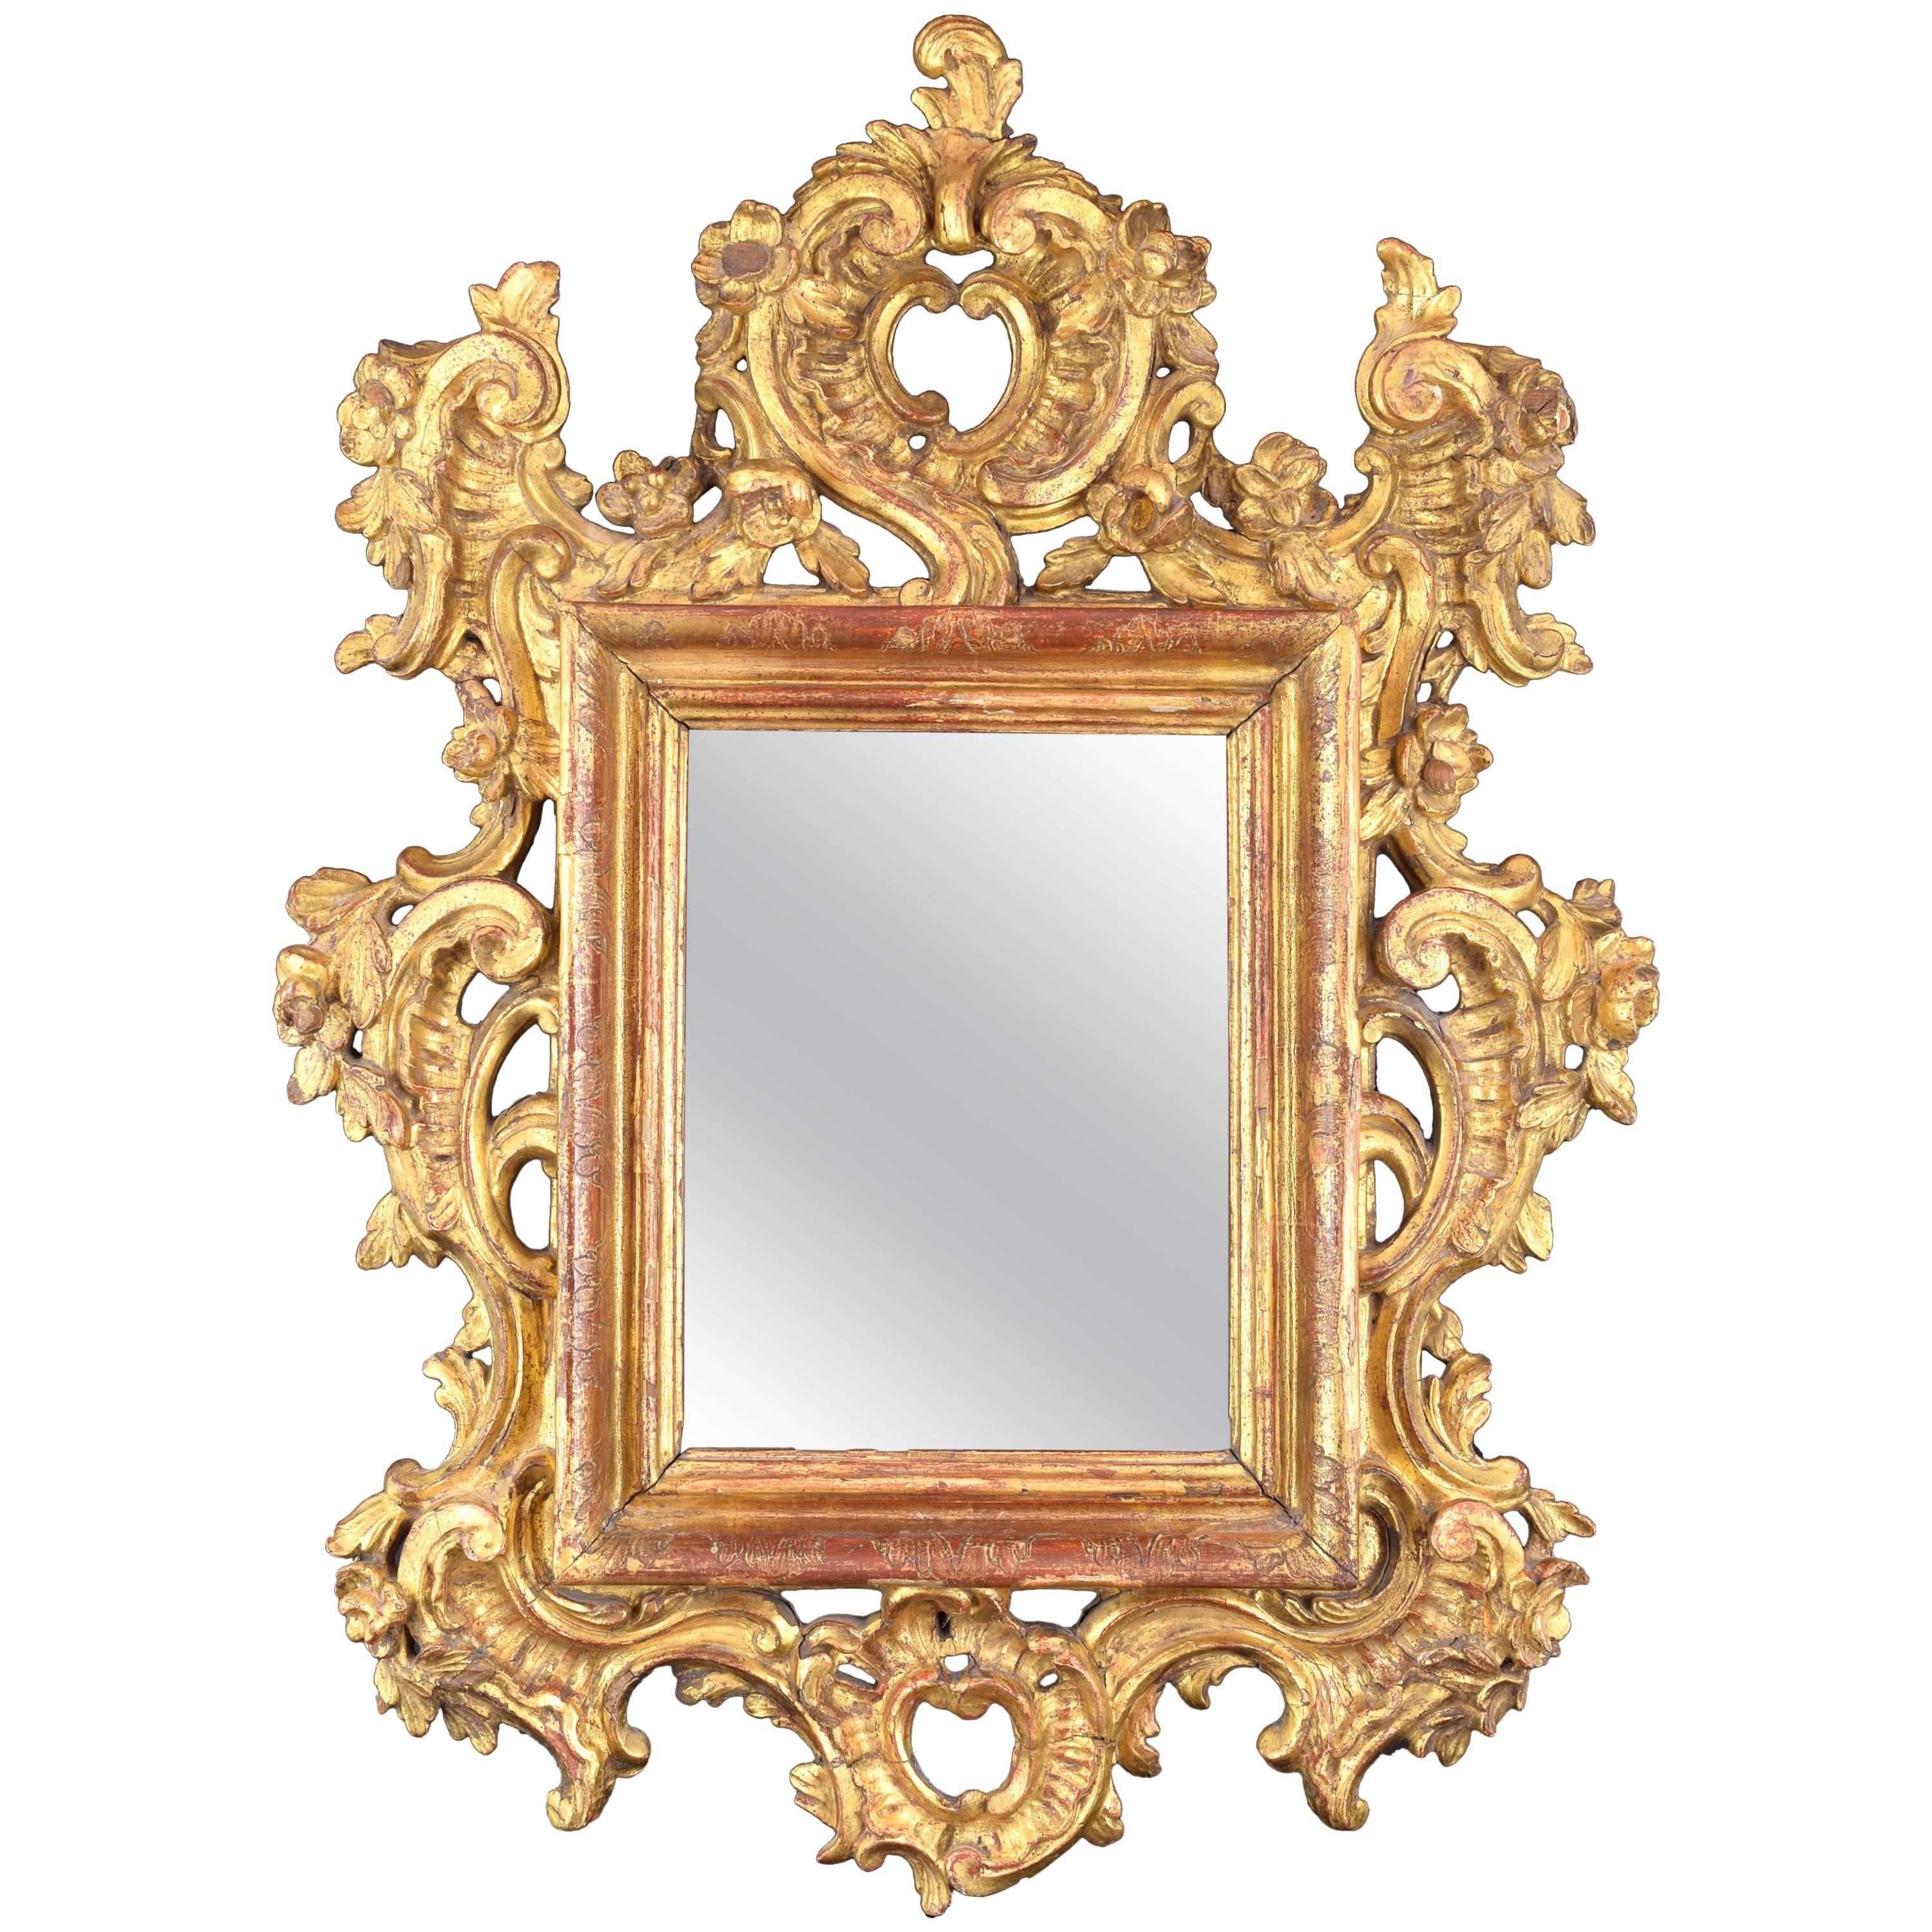 Roccoco Carved Wood Frame, 18th Century